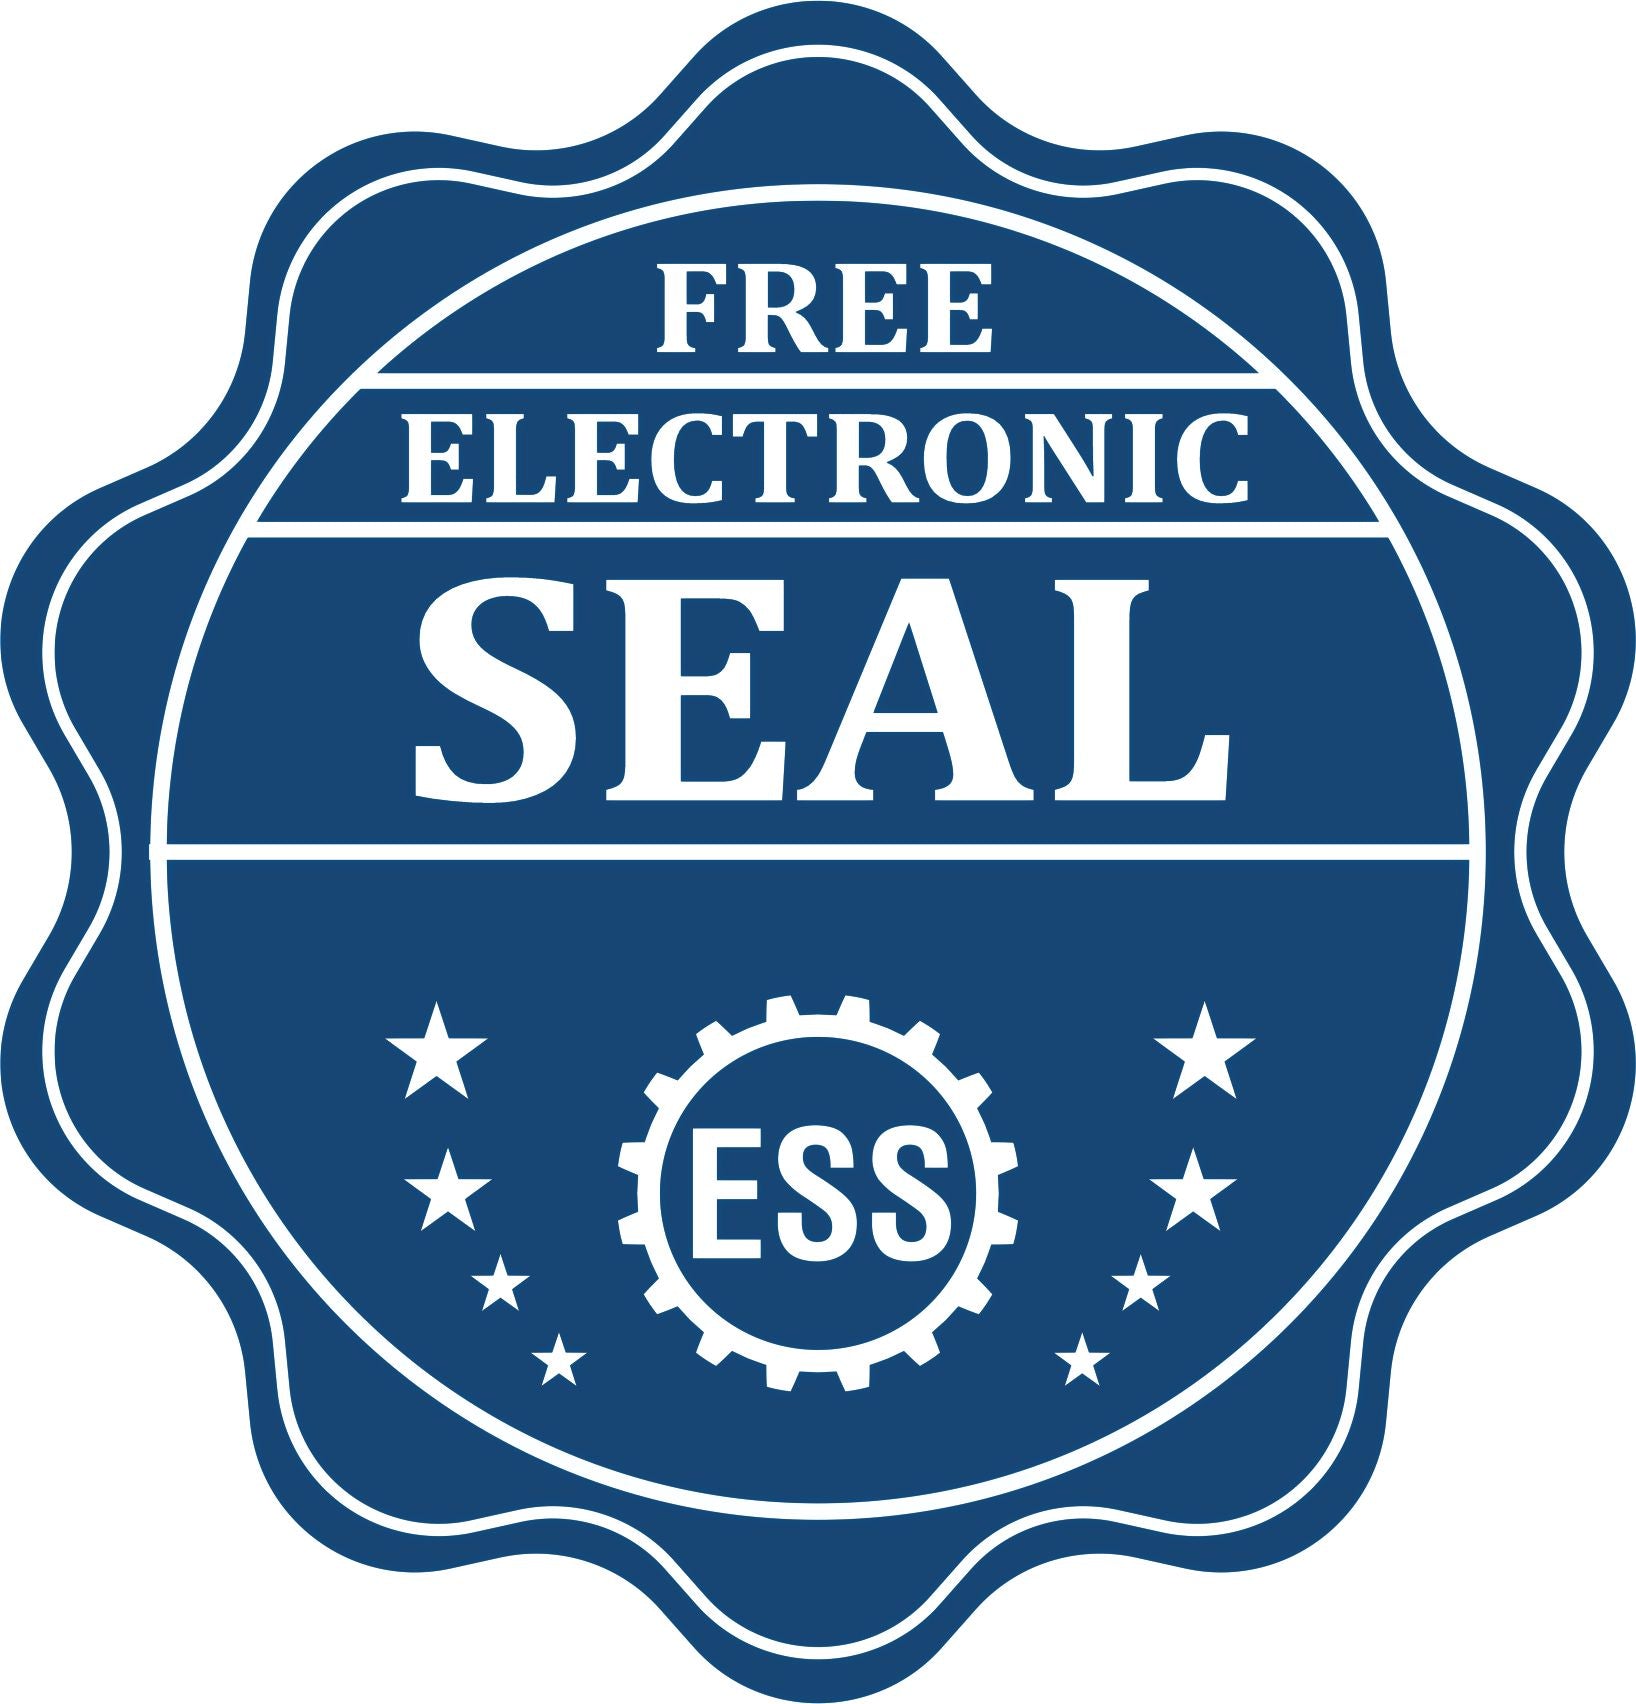 A badge showing a free electronic seal for the Hybrid Pennsylvania Engineer Seal with stars and the ESS gear on the emblem.